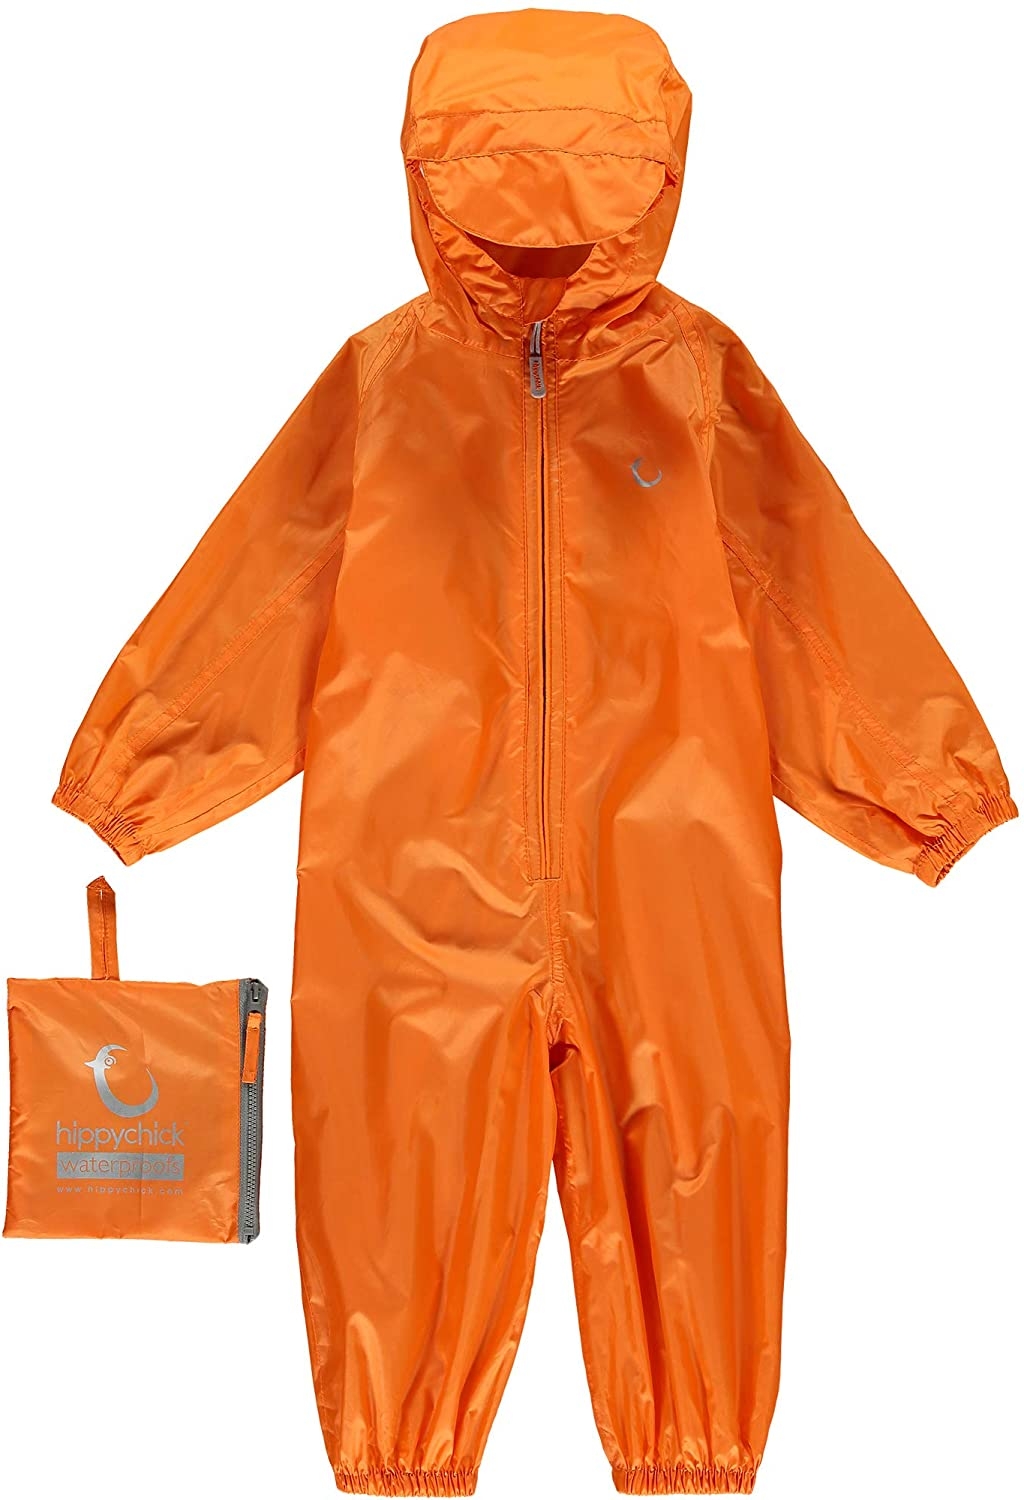 Hippychick Water Resistant Suit 1-7 years Mandarin orange / 2-3 years – Children’s Learning & Vocational Sensory Toys, Aged 0-8 Years